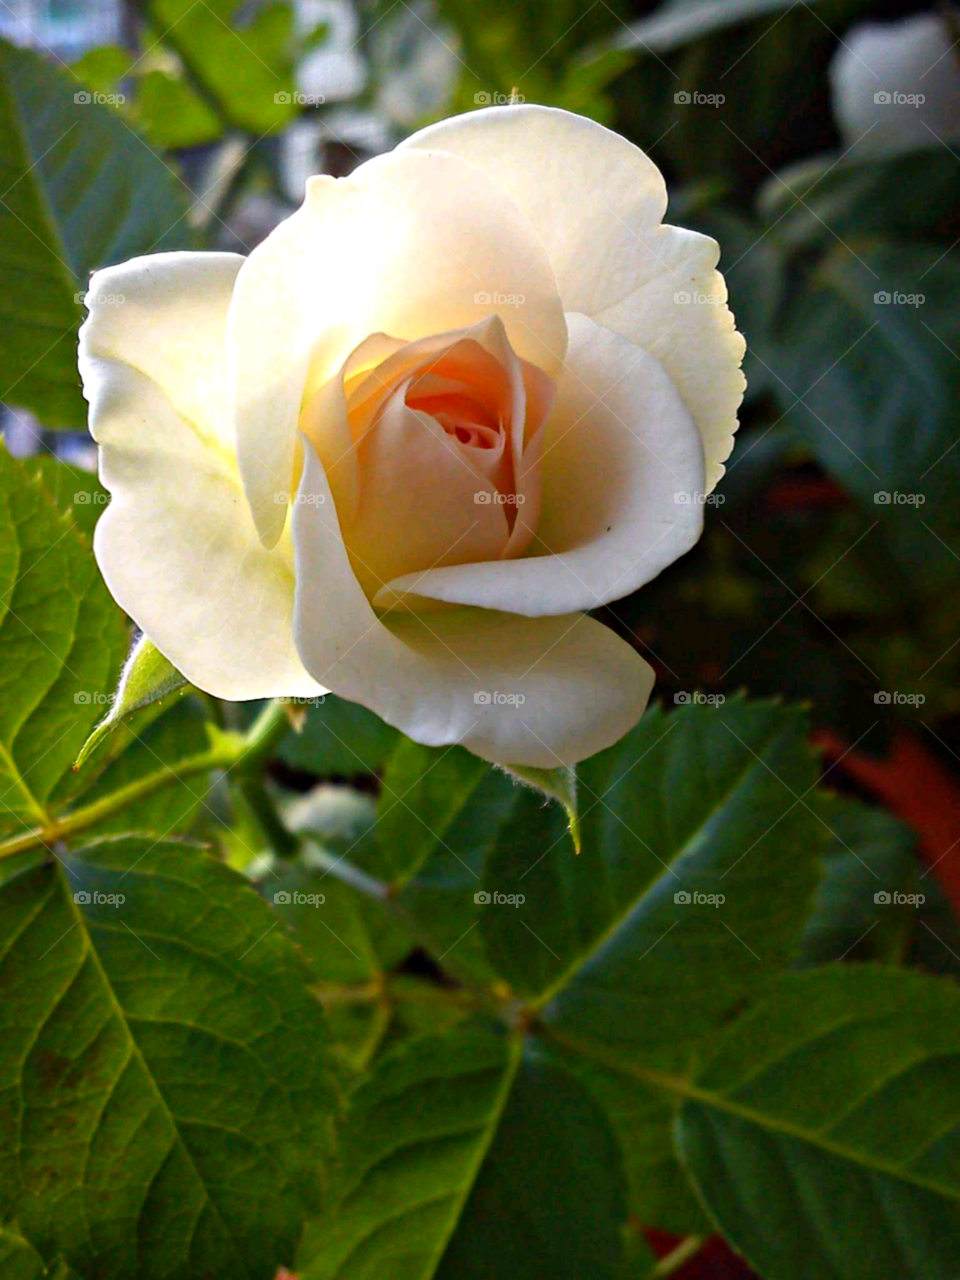 Rosalind rose -  beautiful rose images home gardening make garden beautiful and frequently so well. It has a large light & nice buds that open to a beautiful deep, velvety petaled bloom. The flower has a thick, thorn less stem with dark green leaves.